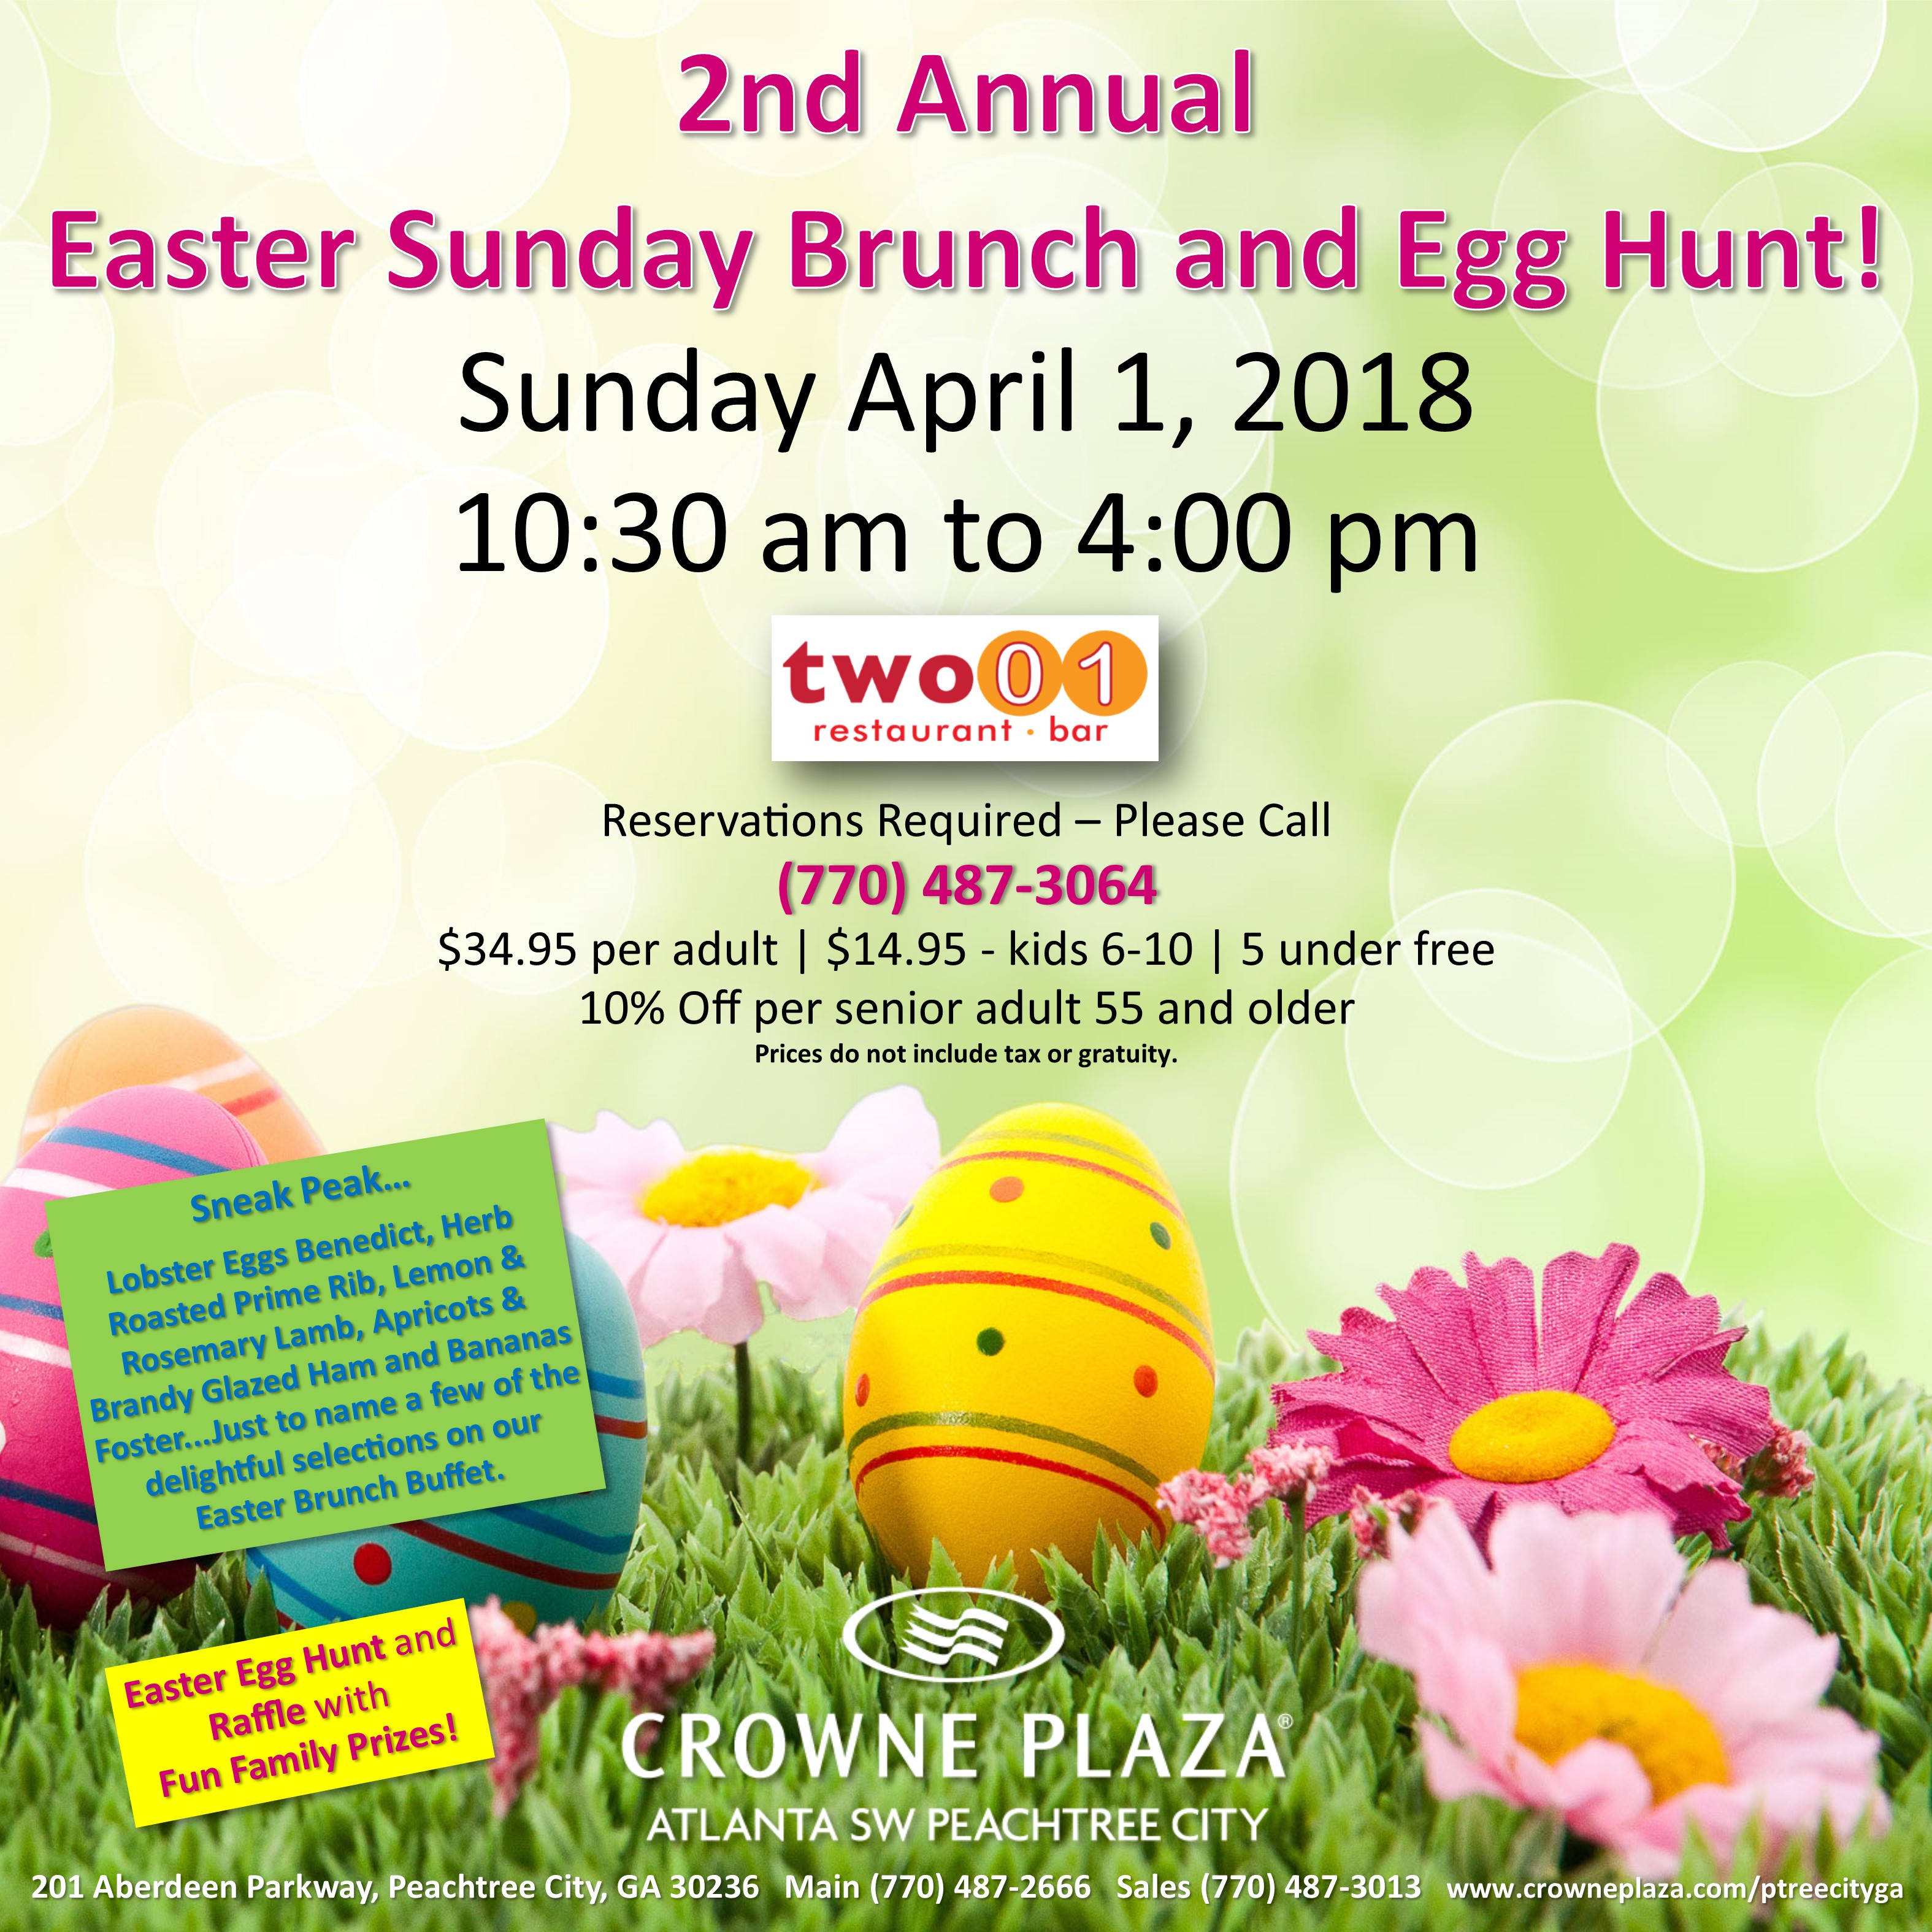 Easter Brunch and Egg Hunt at The Crowne Plaza Peachtree City